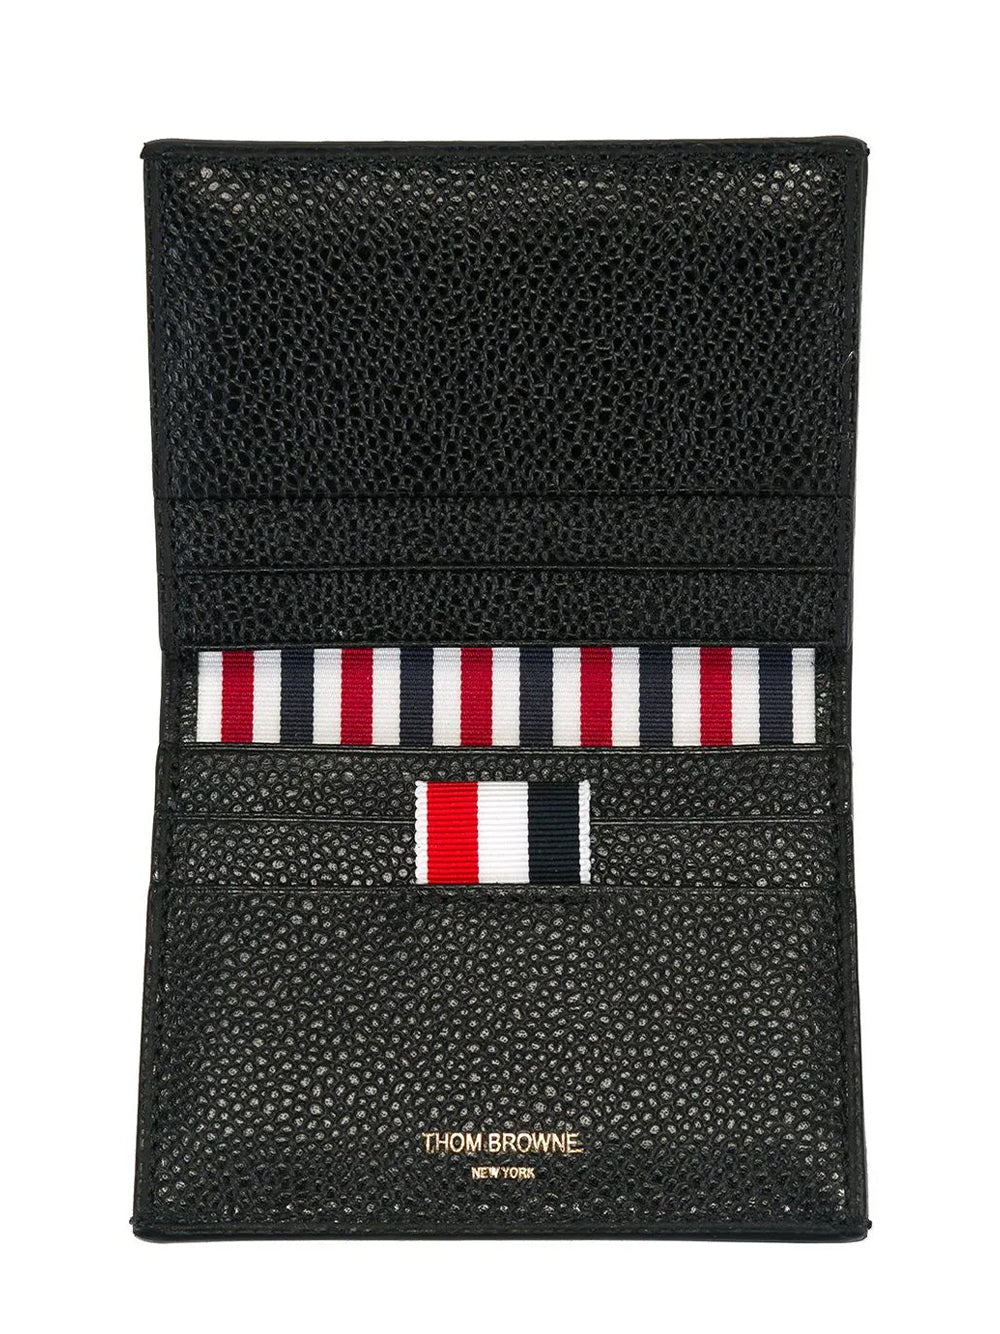 Double Card Holder In Pebble Grain Leather (Black)